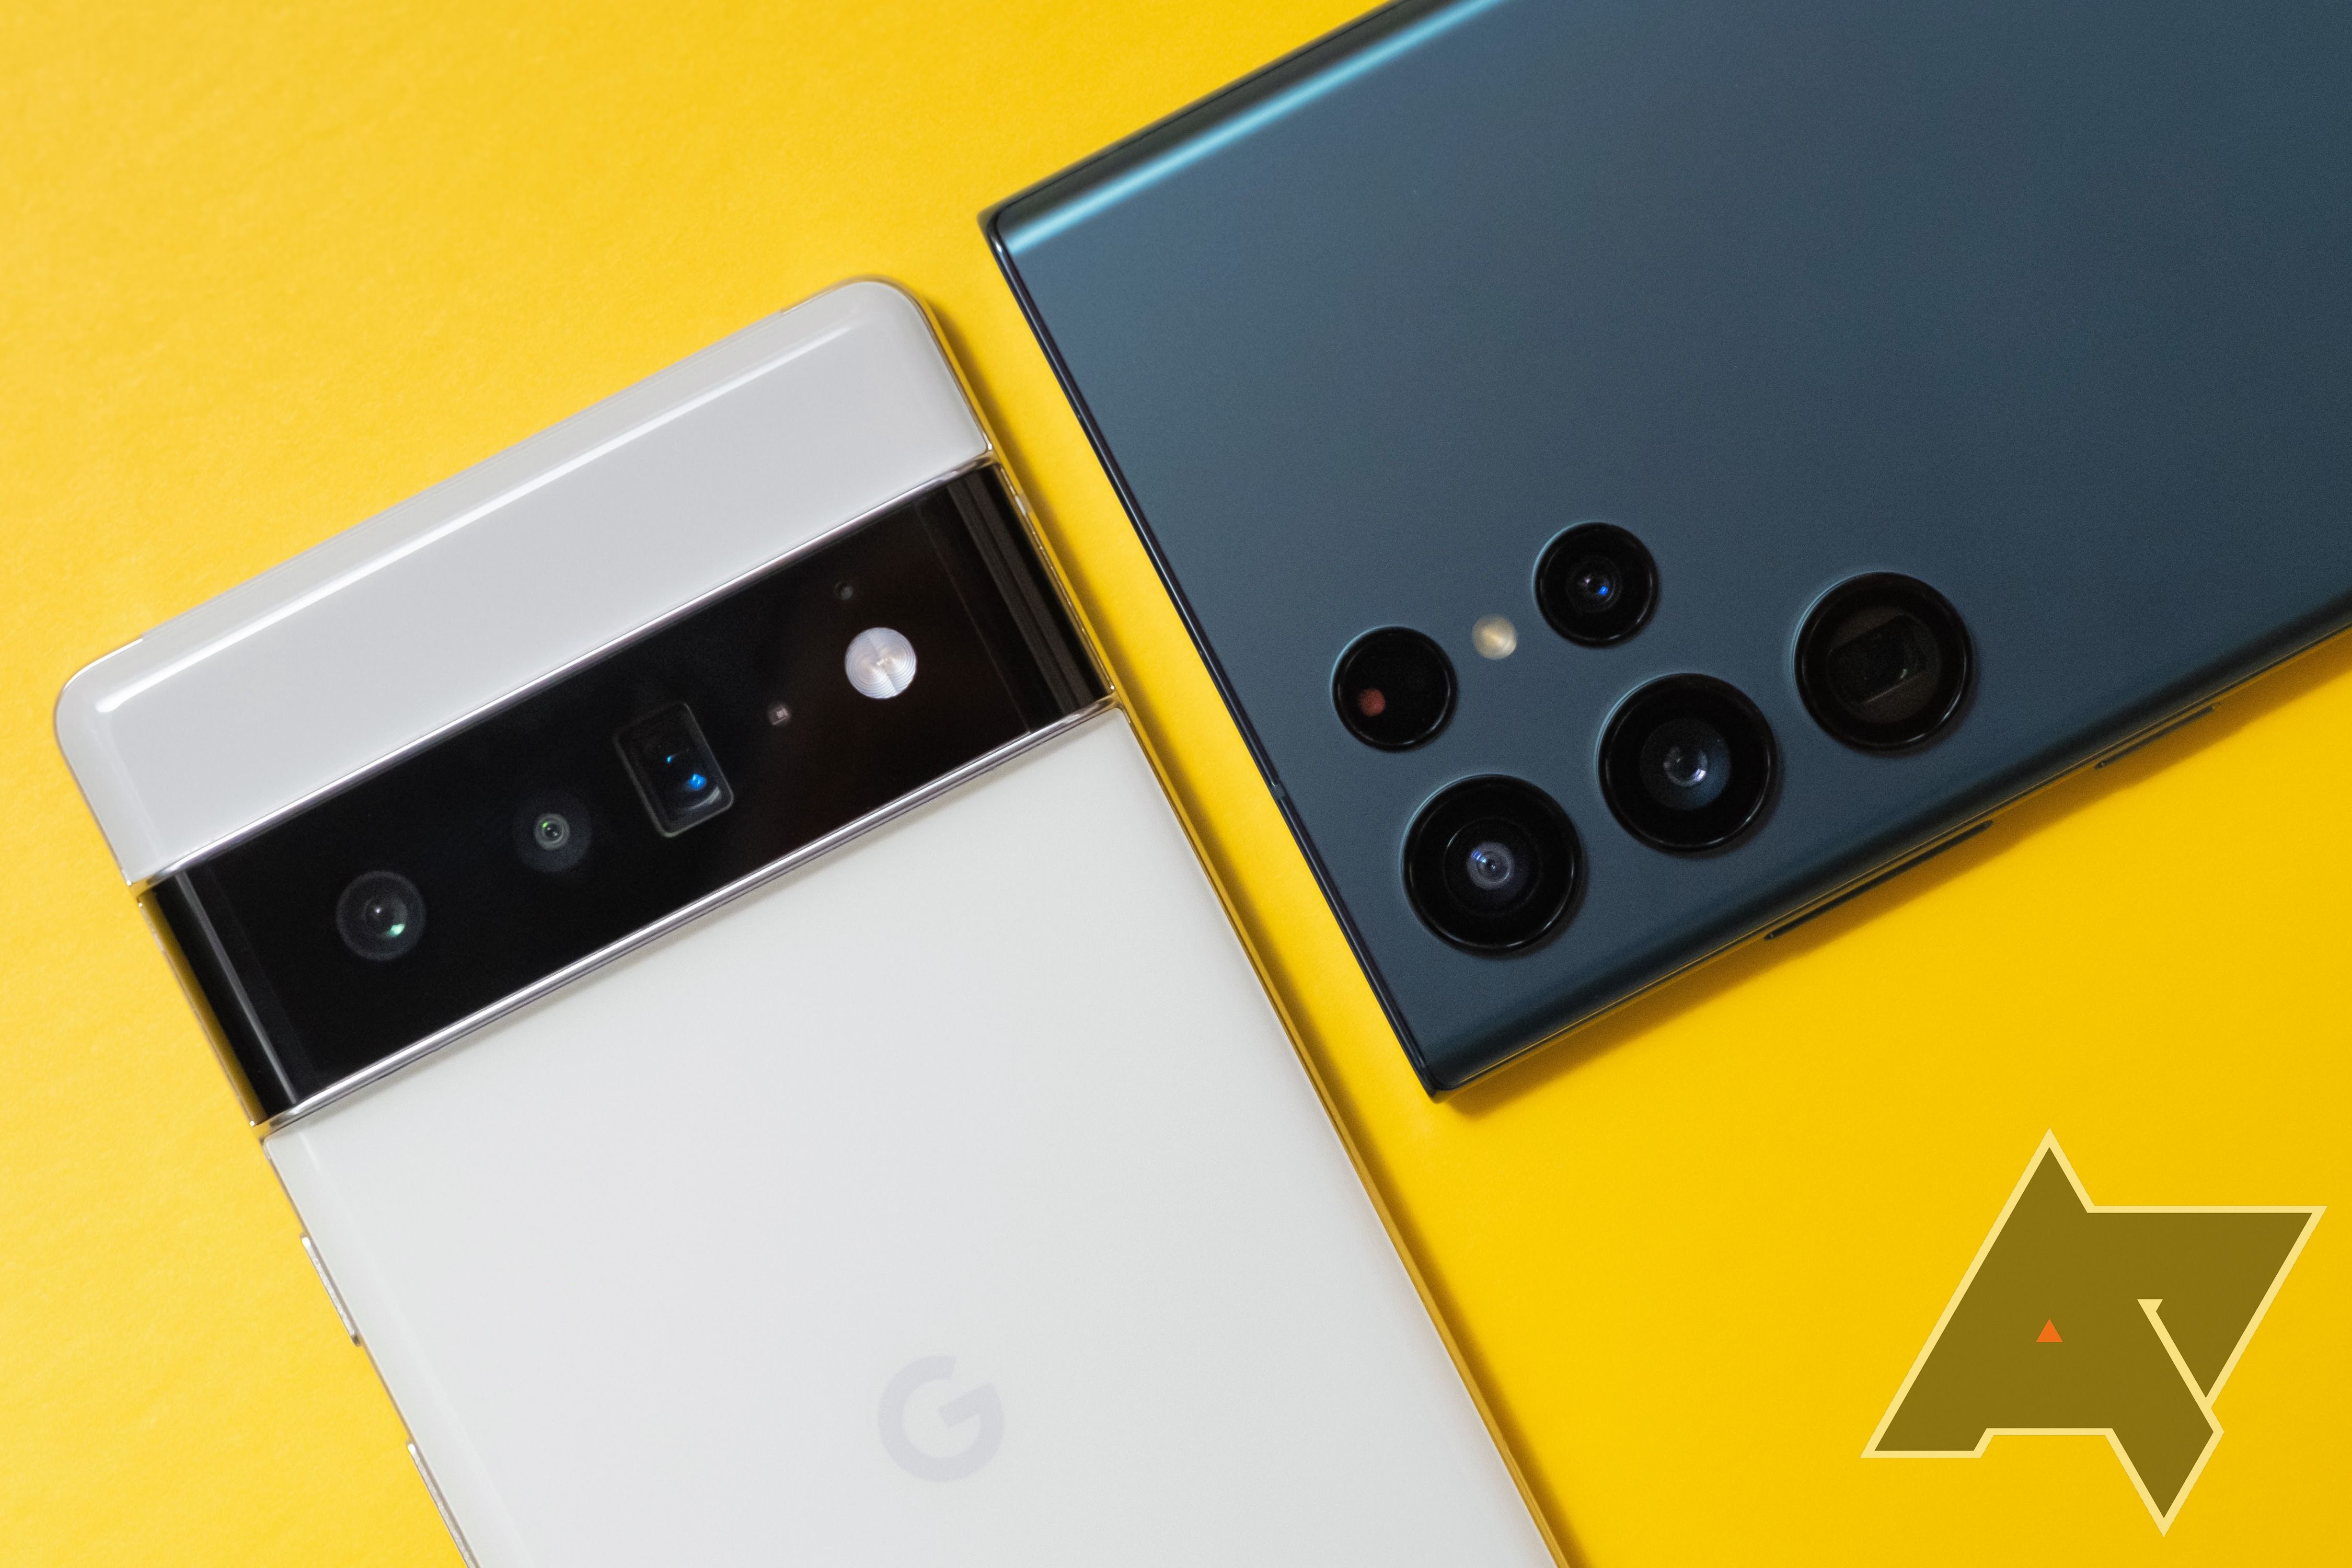 The Google Pixel 6 Pro and the Samsung Galaxy S22 Ultra cameras